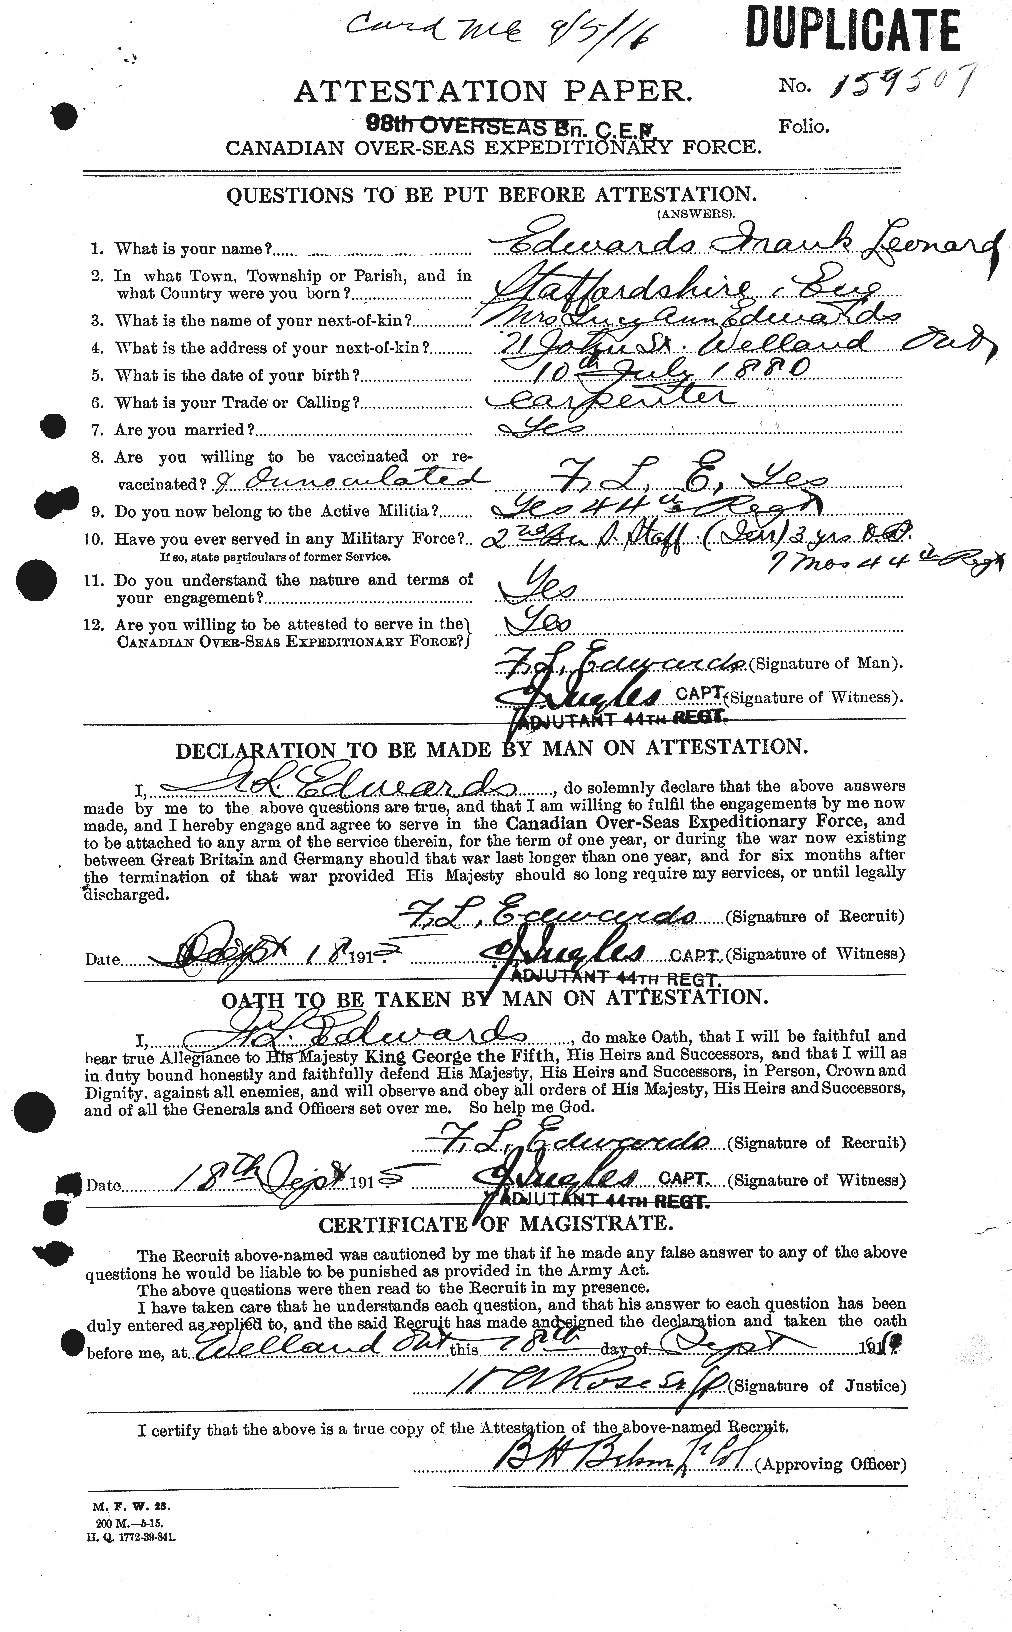 Personnel Records of the First World War - CEF 309055a